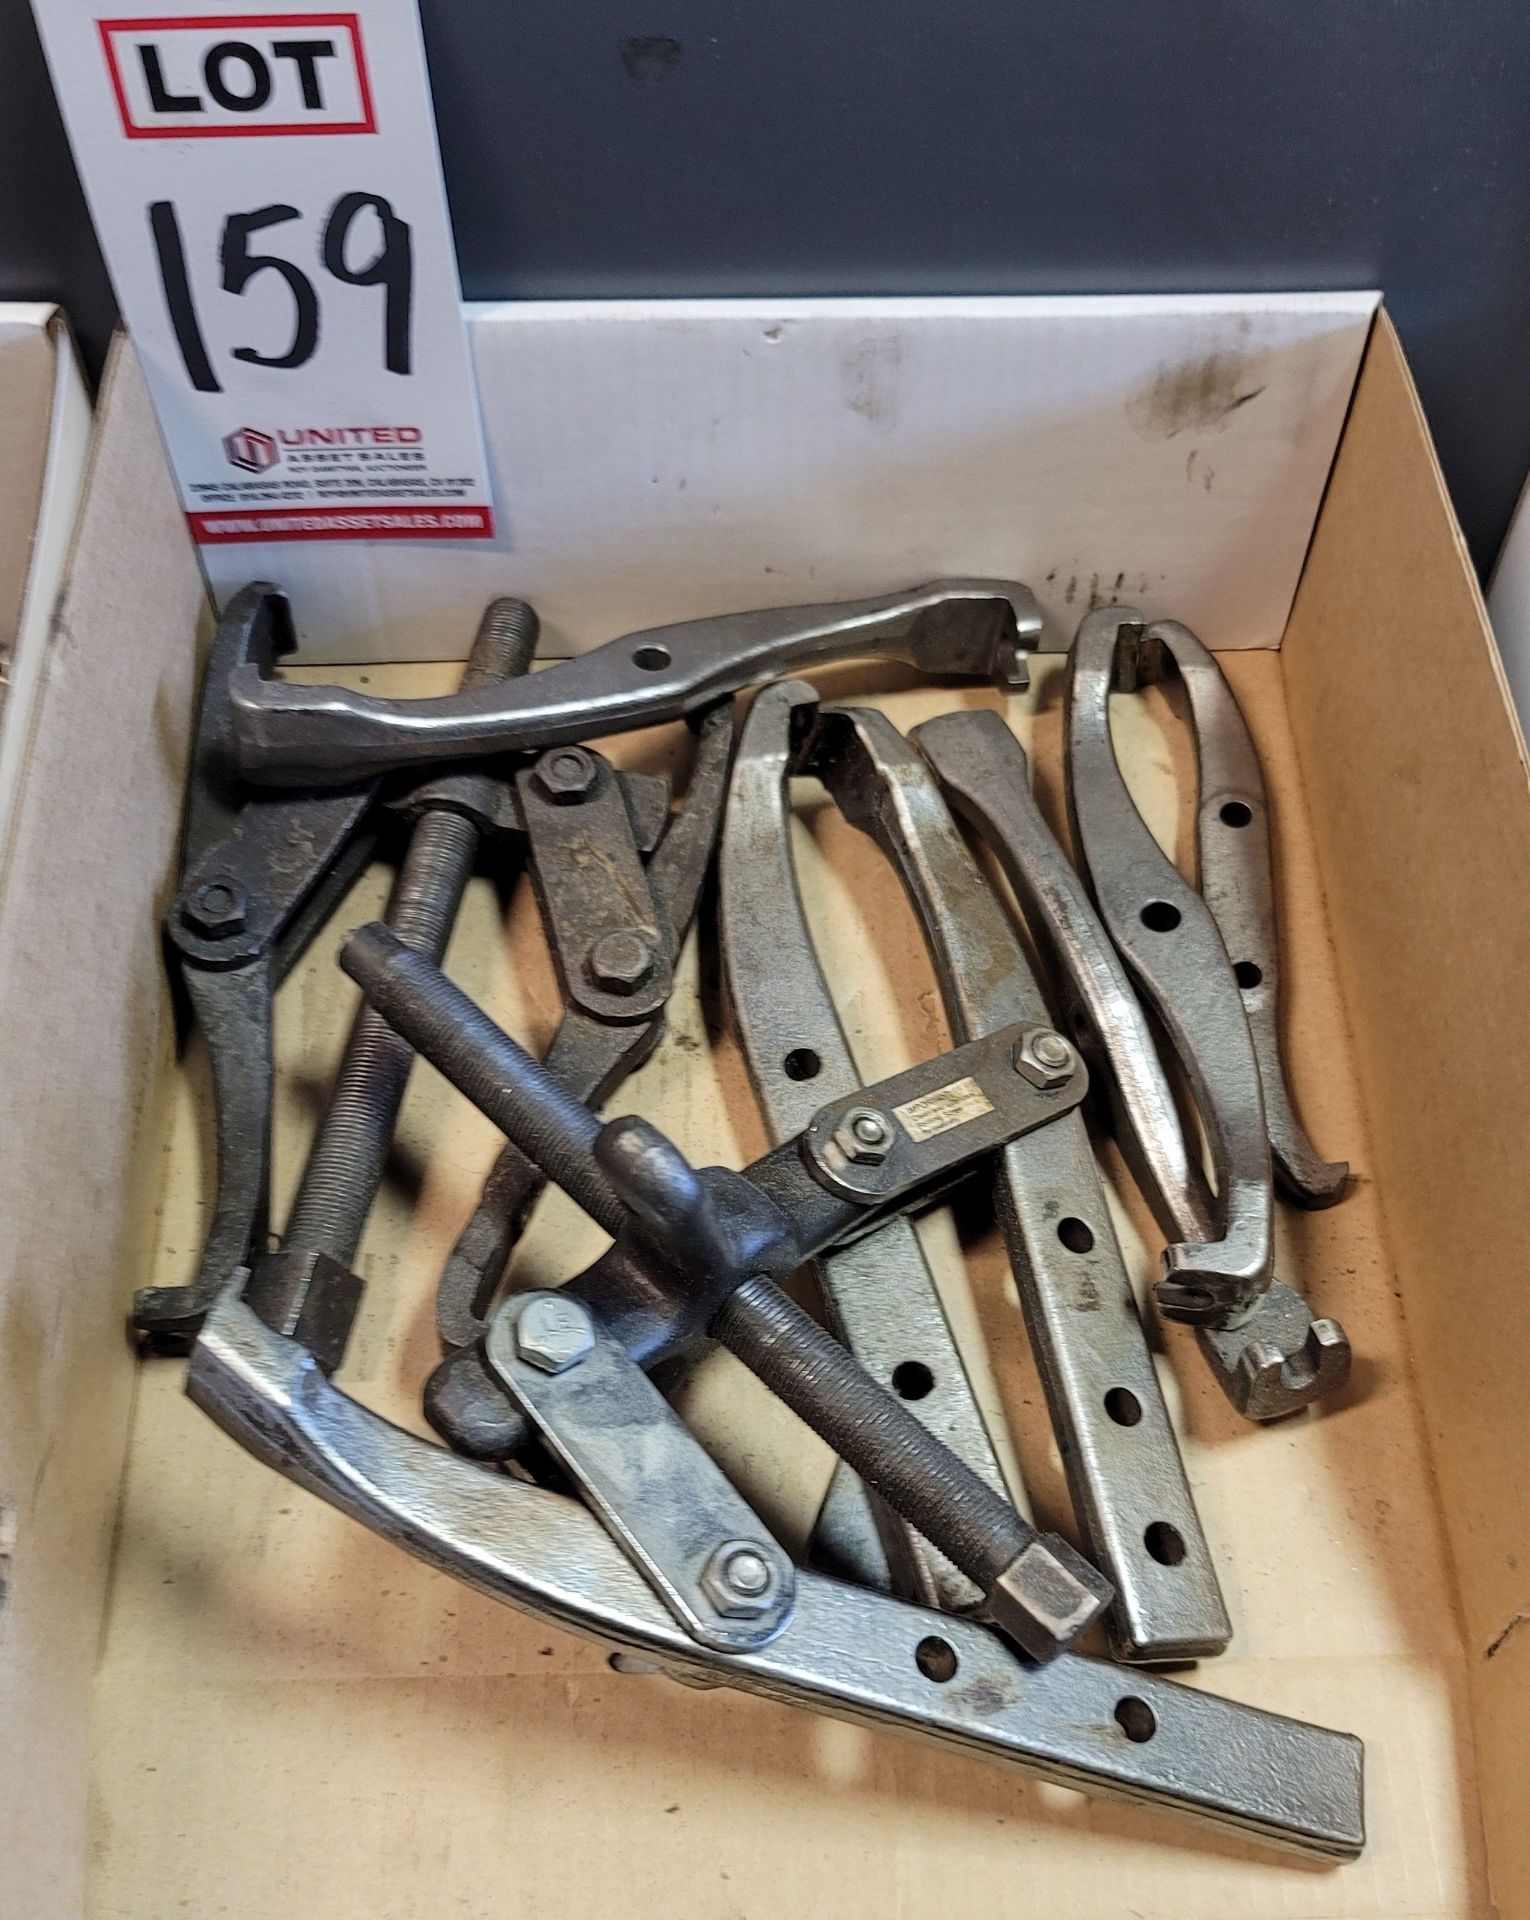 LOT - PULLERS, (LOCATION: 2174 W 2300 S)